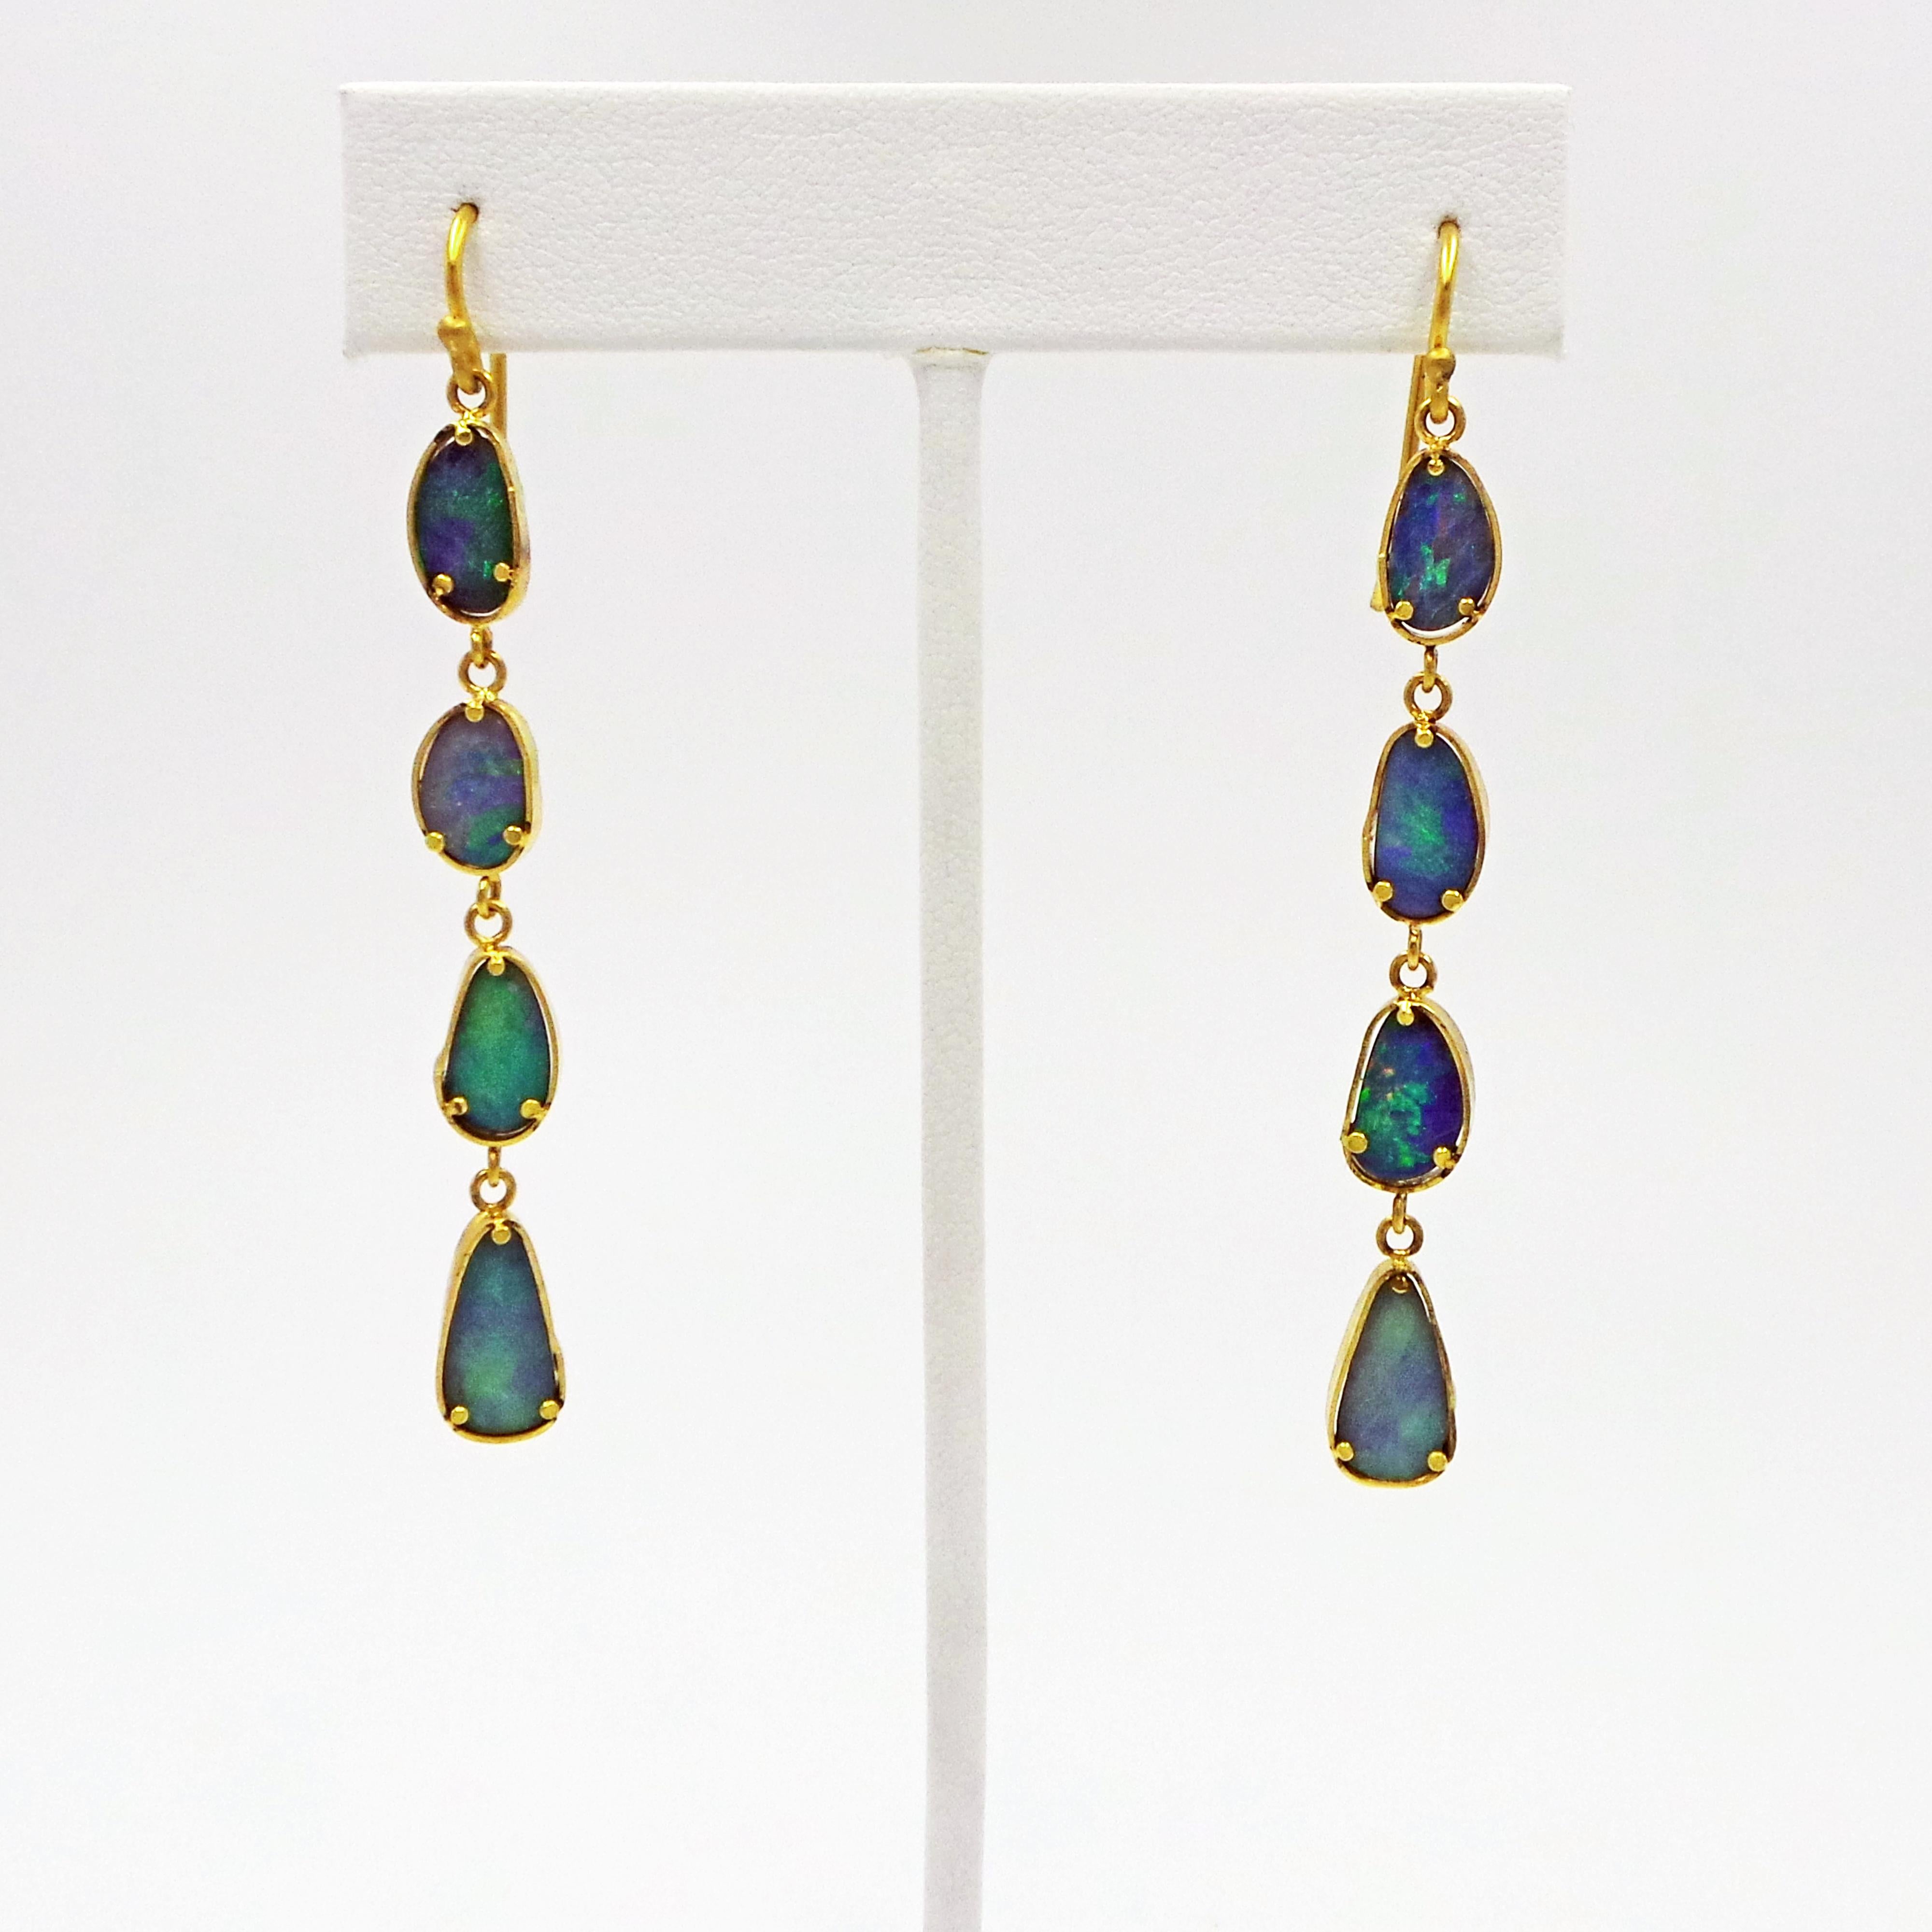 Beautiful four tier, blue / green Australian Boulder Opals and 22k yellow gold hand-fabricated, dangle earrings with French wires. Lightweight for comfortable wear.